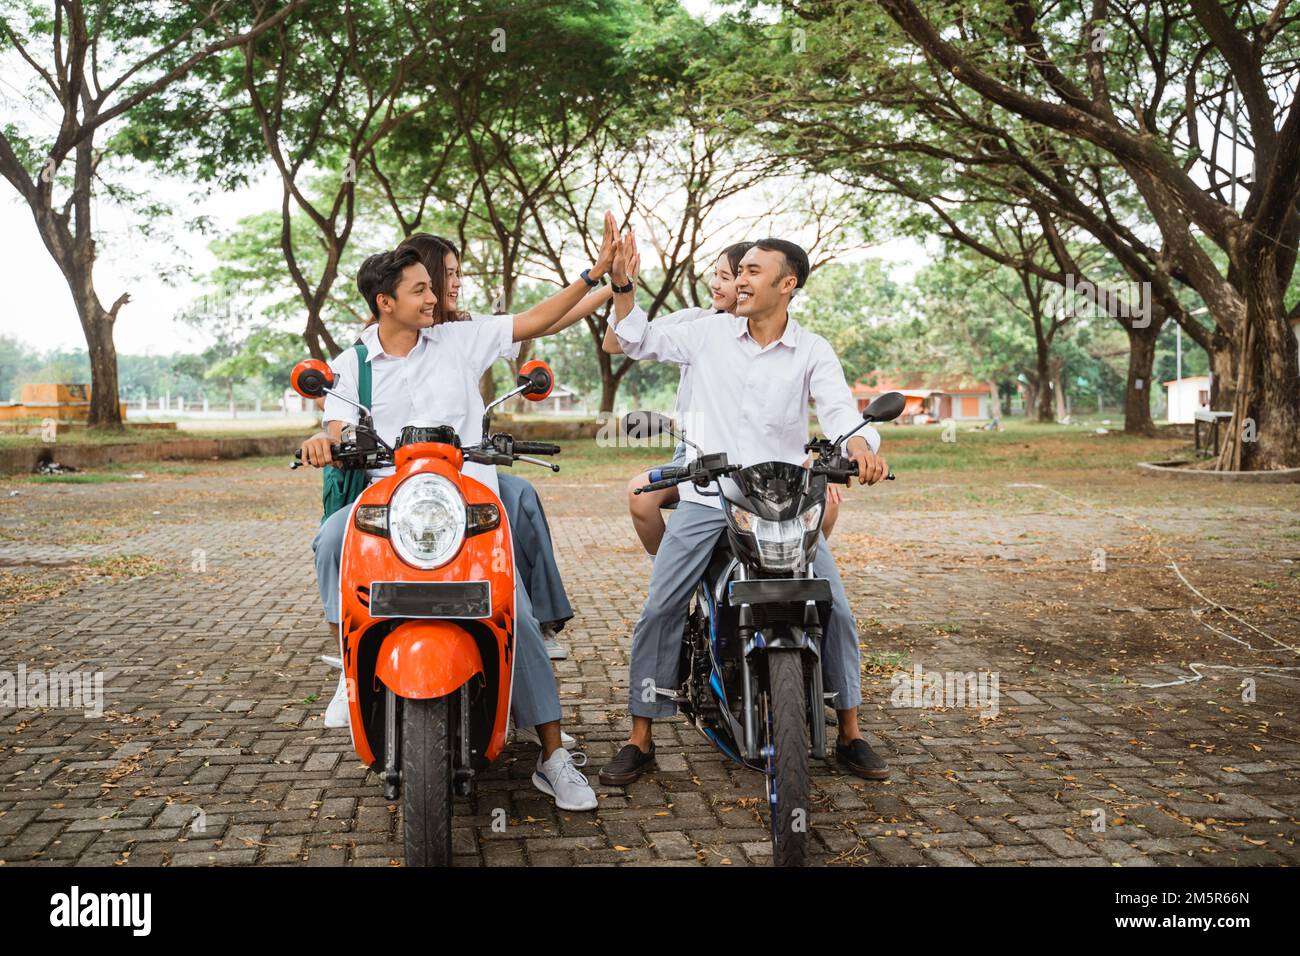 Students clapping their hands with their friends while riding motorbike Stock Photo